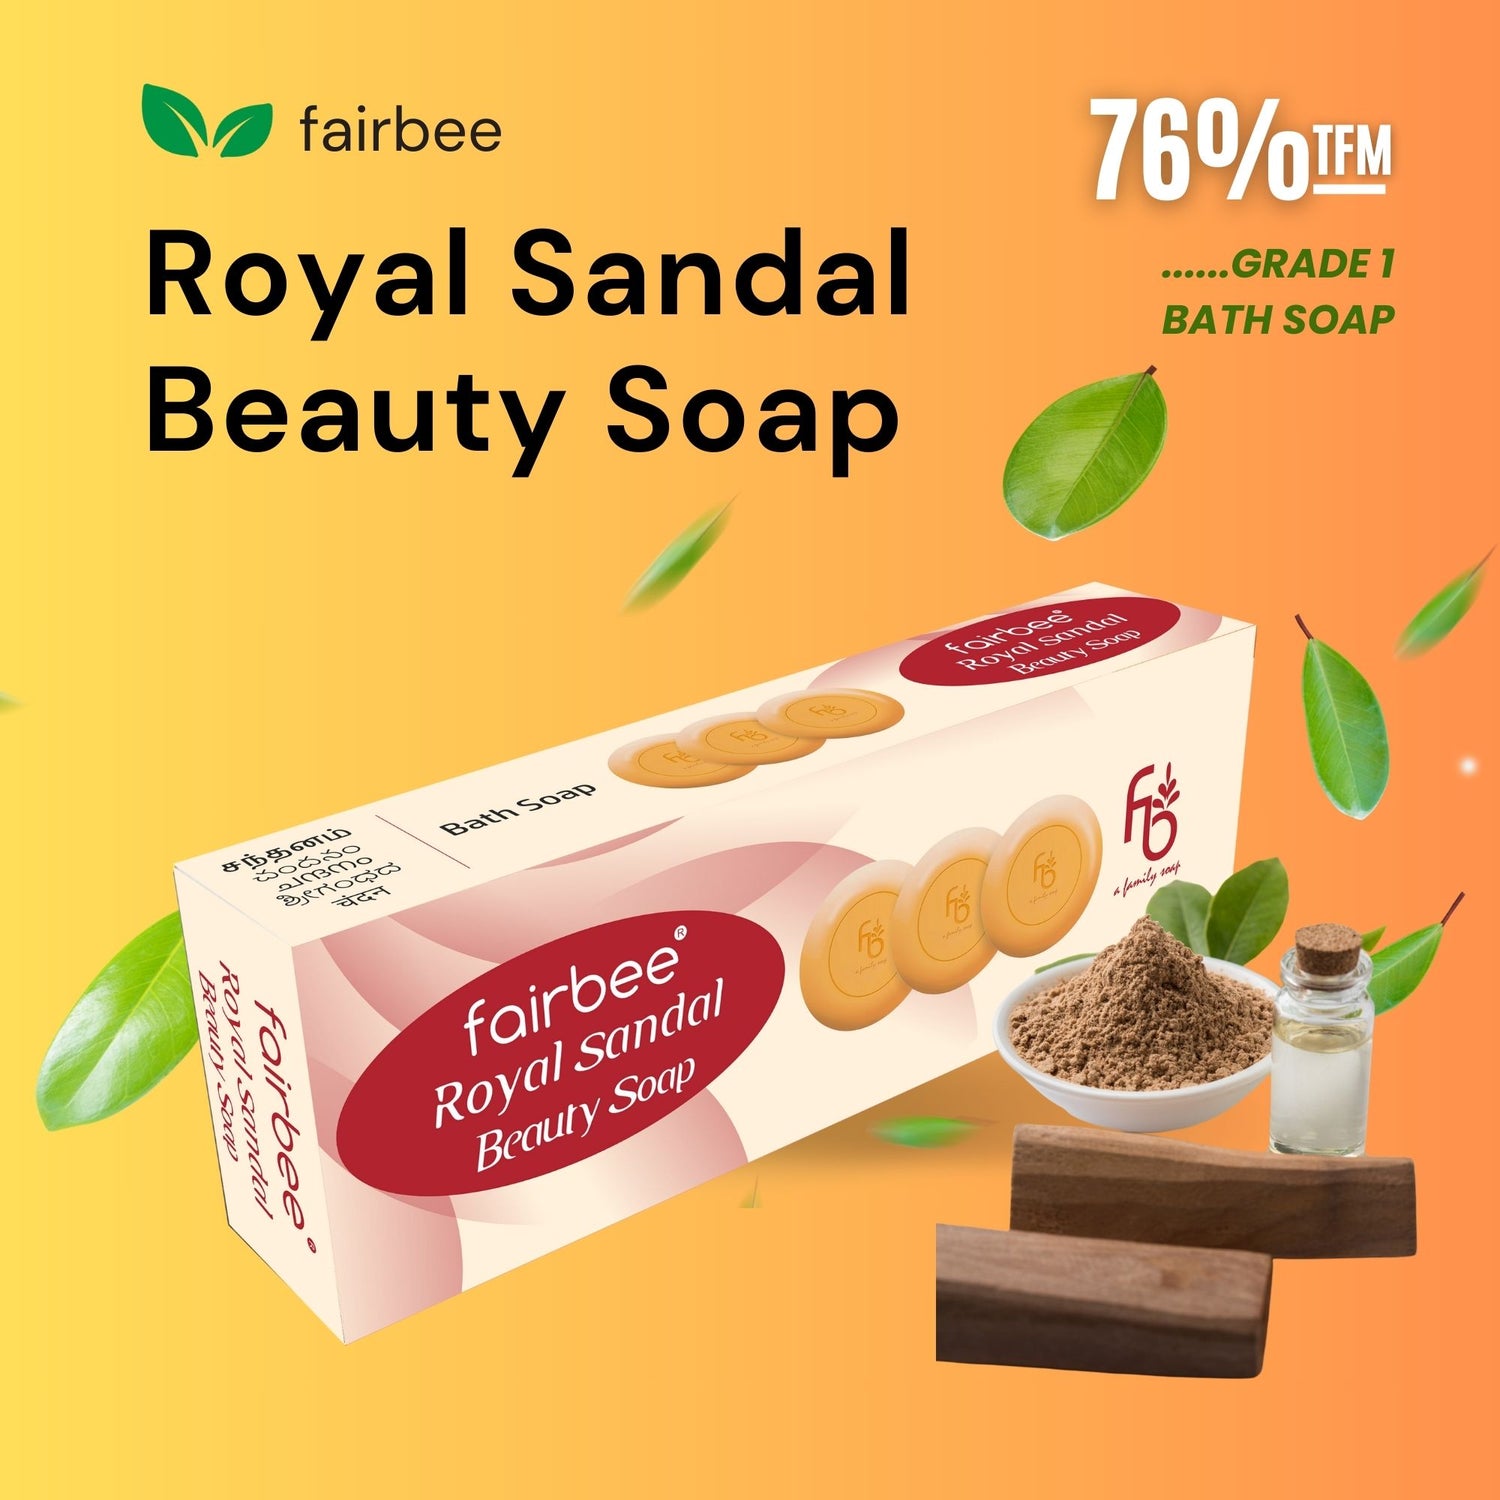 Fairbee Royal Sandal Grade 1 Bath Soap For Men, Women & Kids - Enriched with High Concentration of Sandal Oil, Sandal Powder, Glycerin, Coconut & Vitamin E - Trio Pack Of 2 (Contains 6 x 150 Gram Soaps)